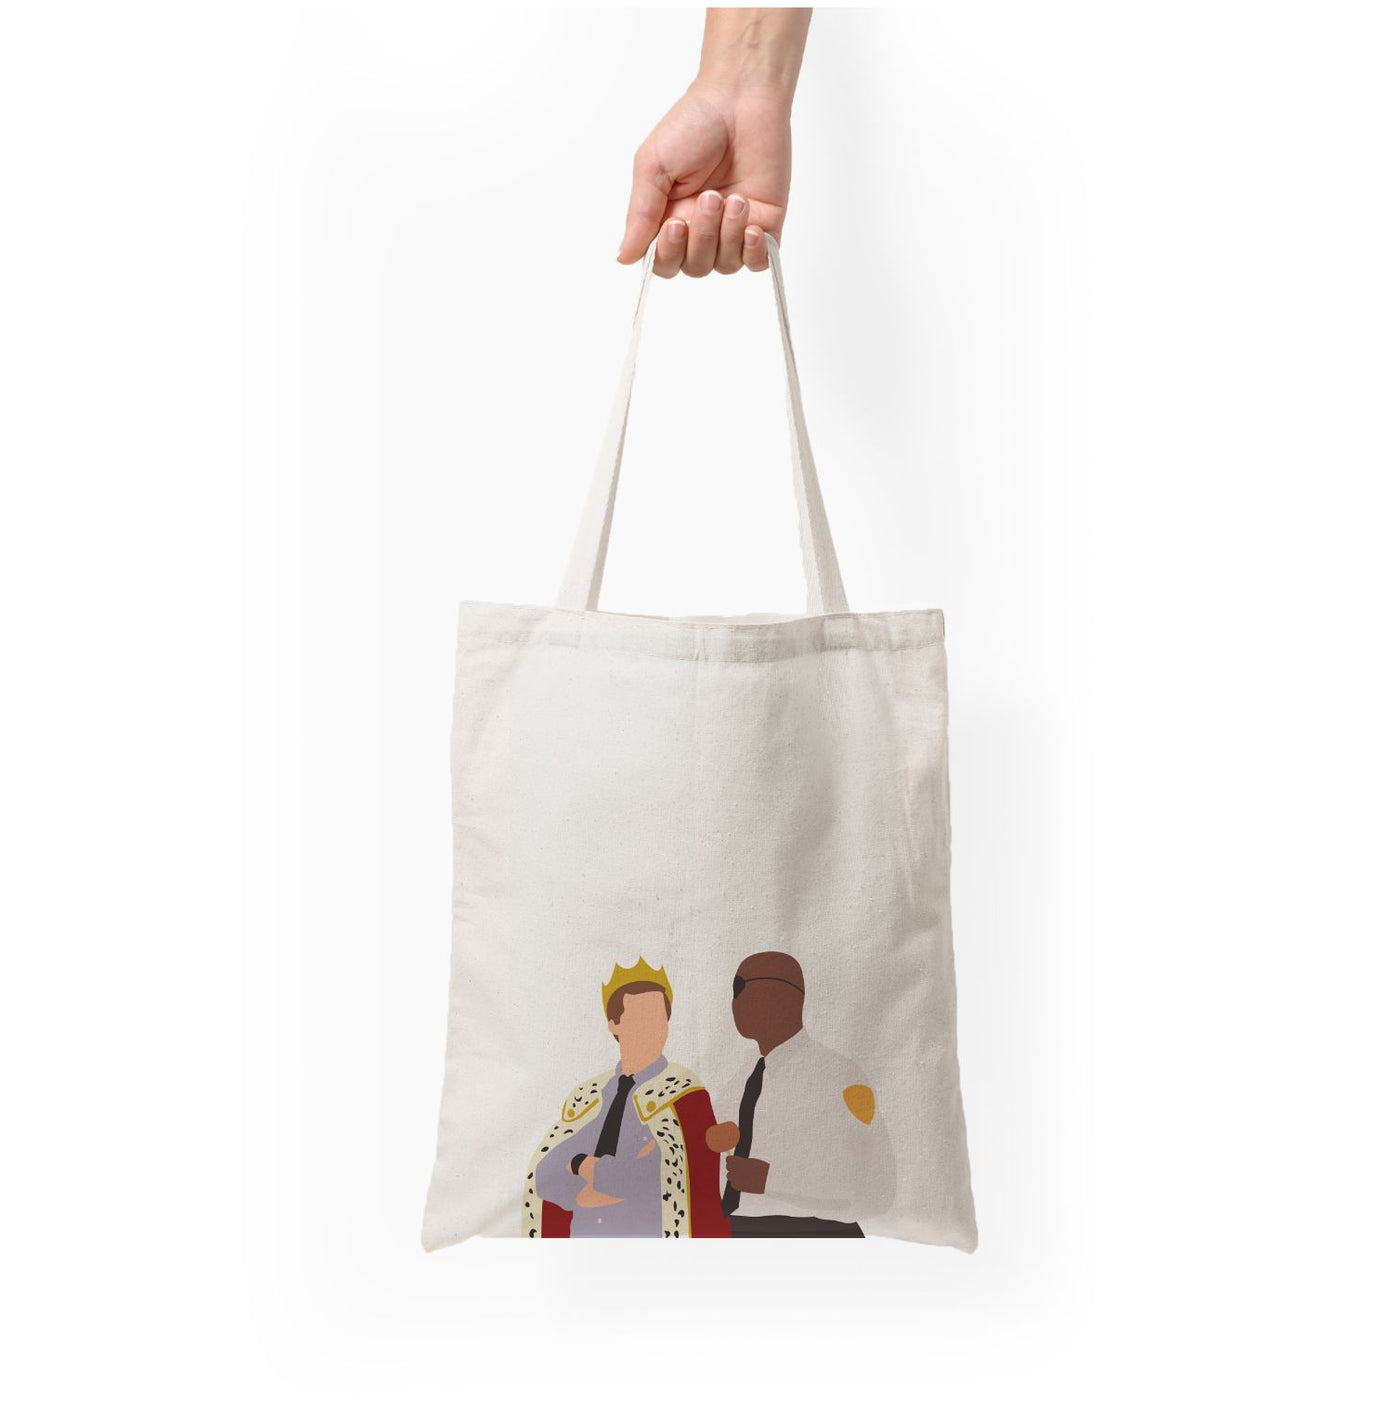 Jake and Holt Brooklyn 99 - Halloween Specials Tote Bag